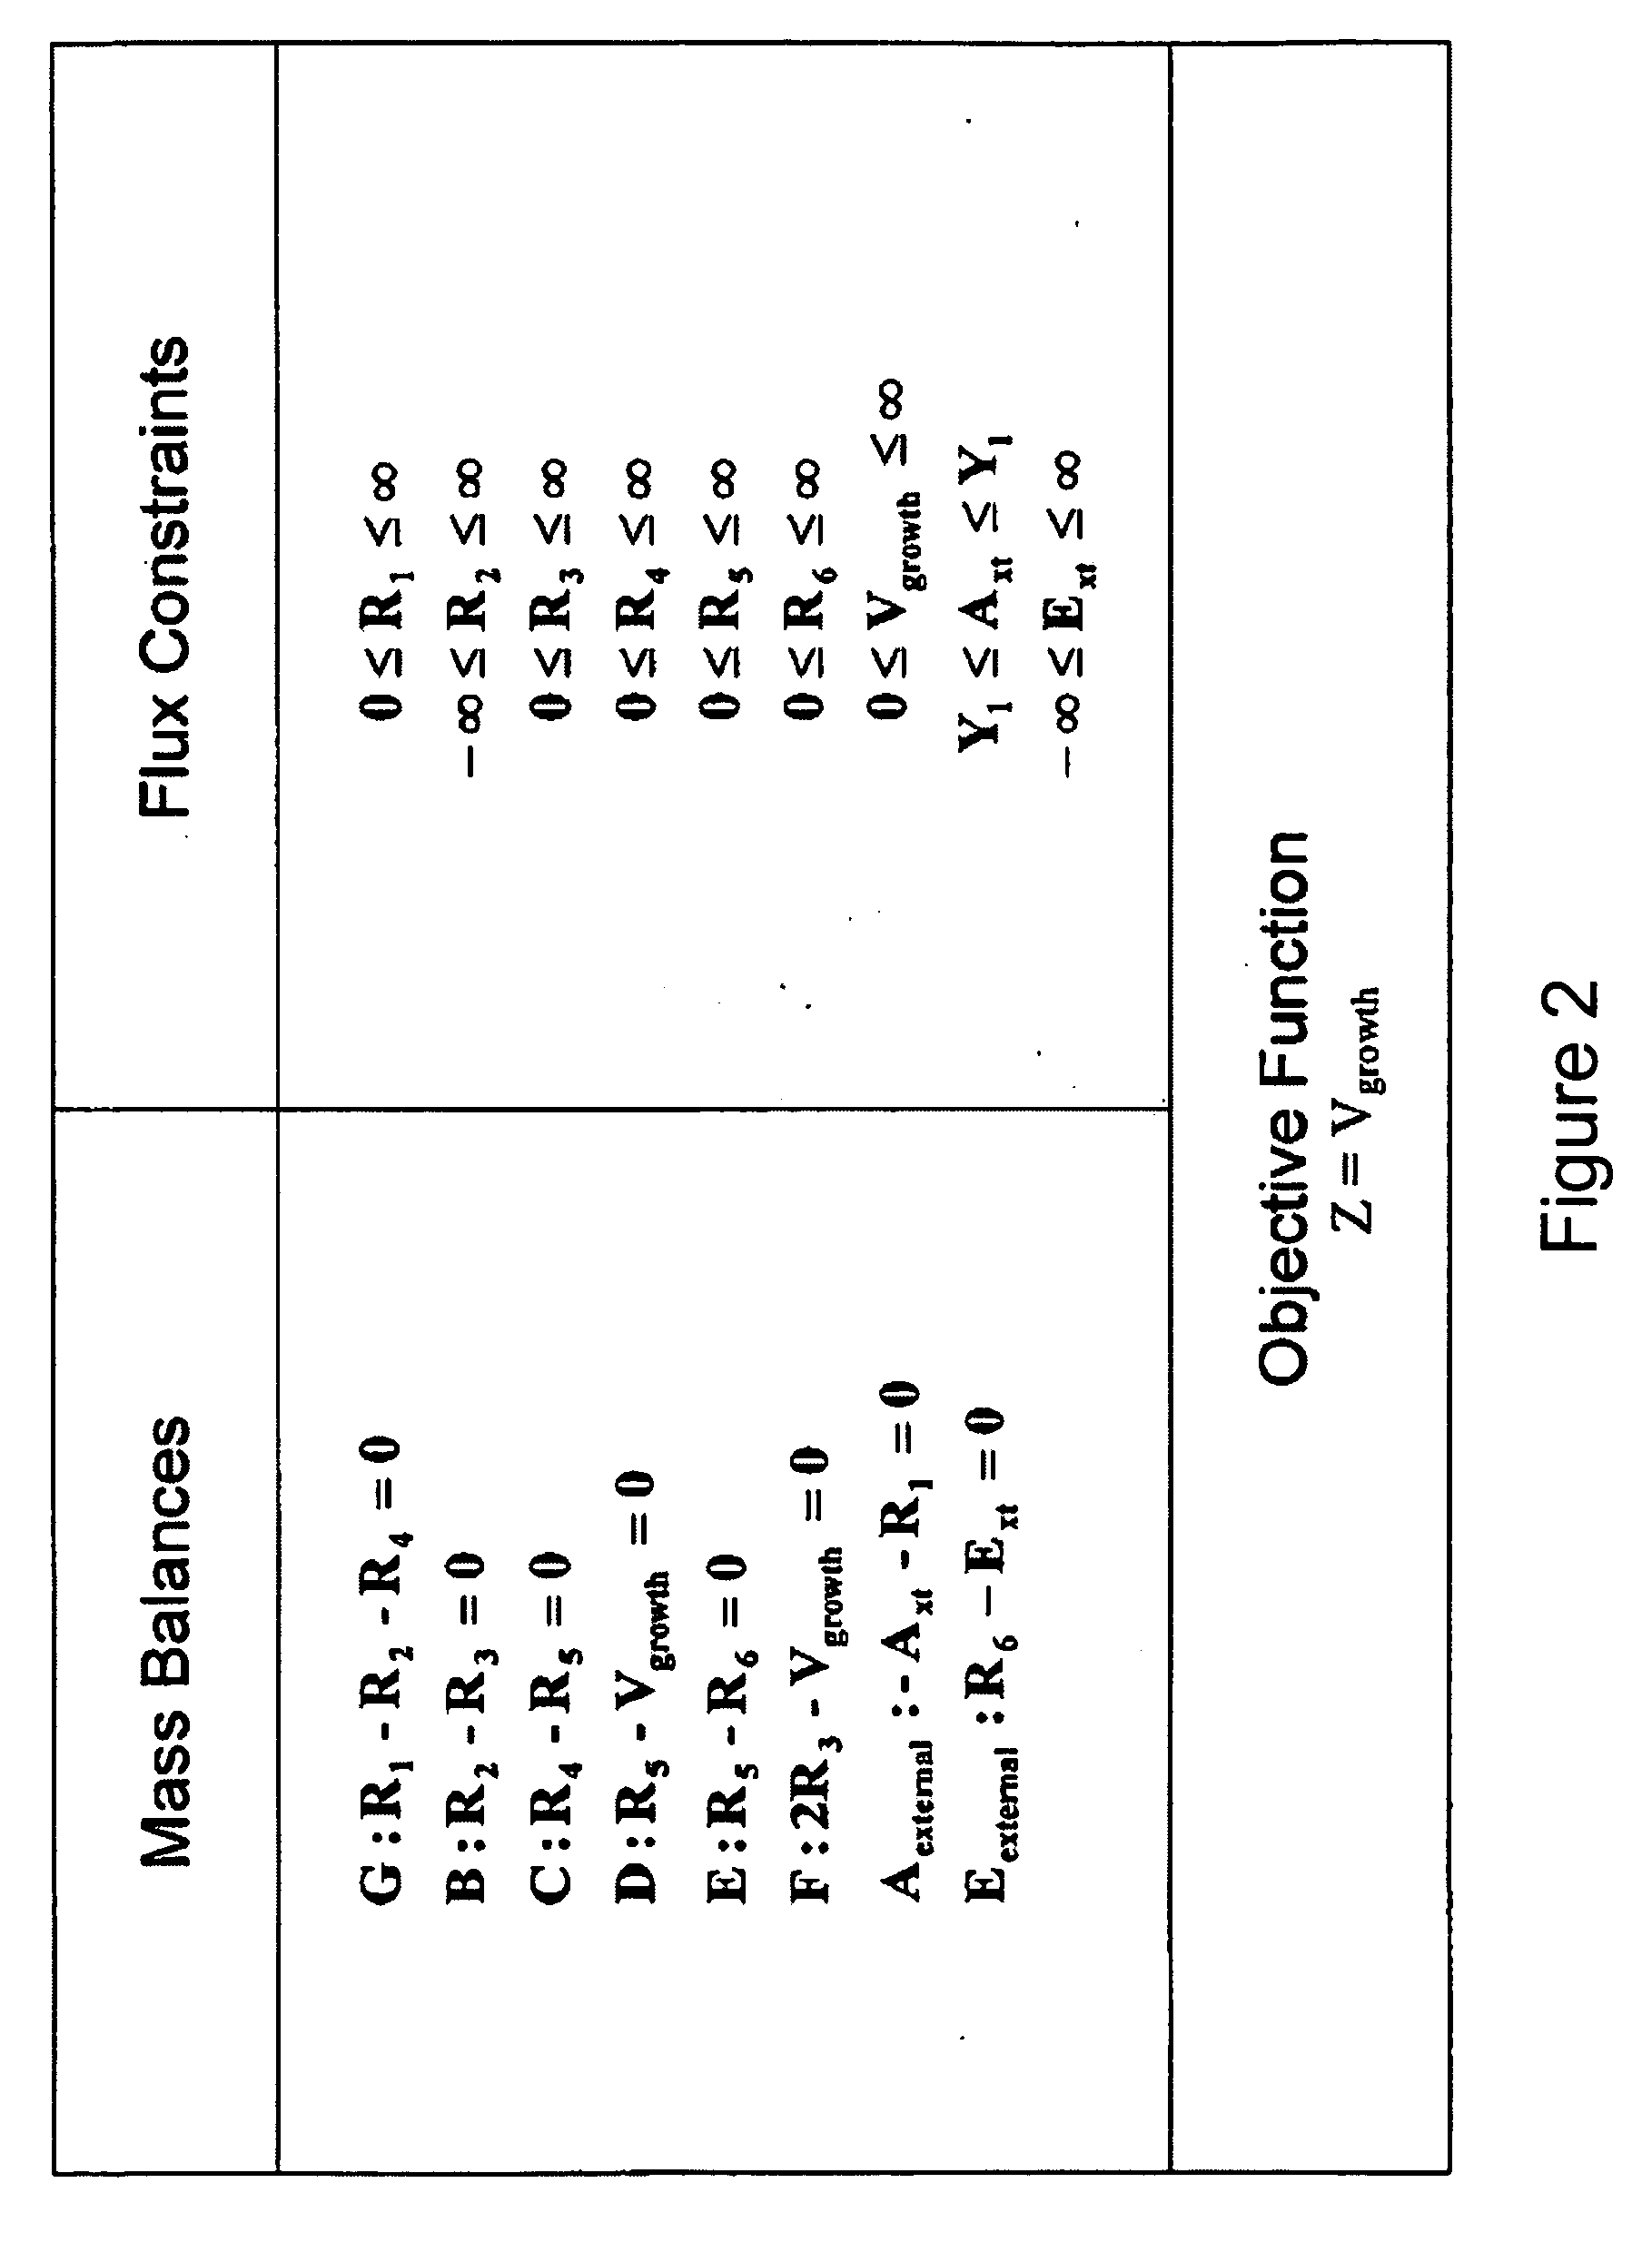 Multicellular metabolic models and methods